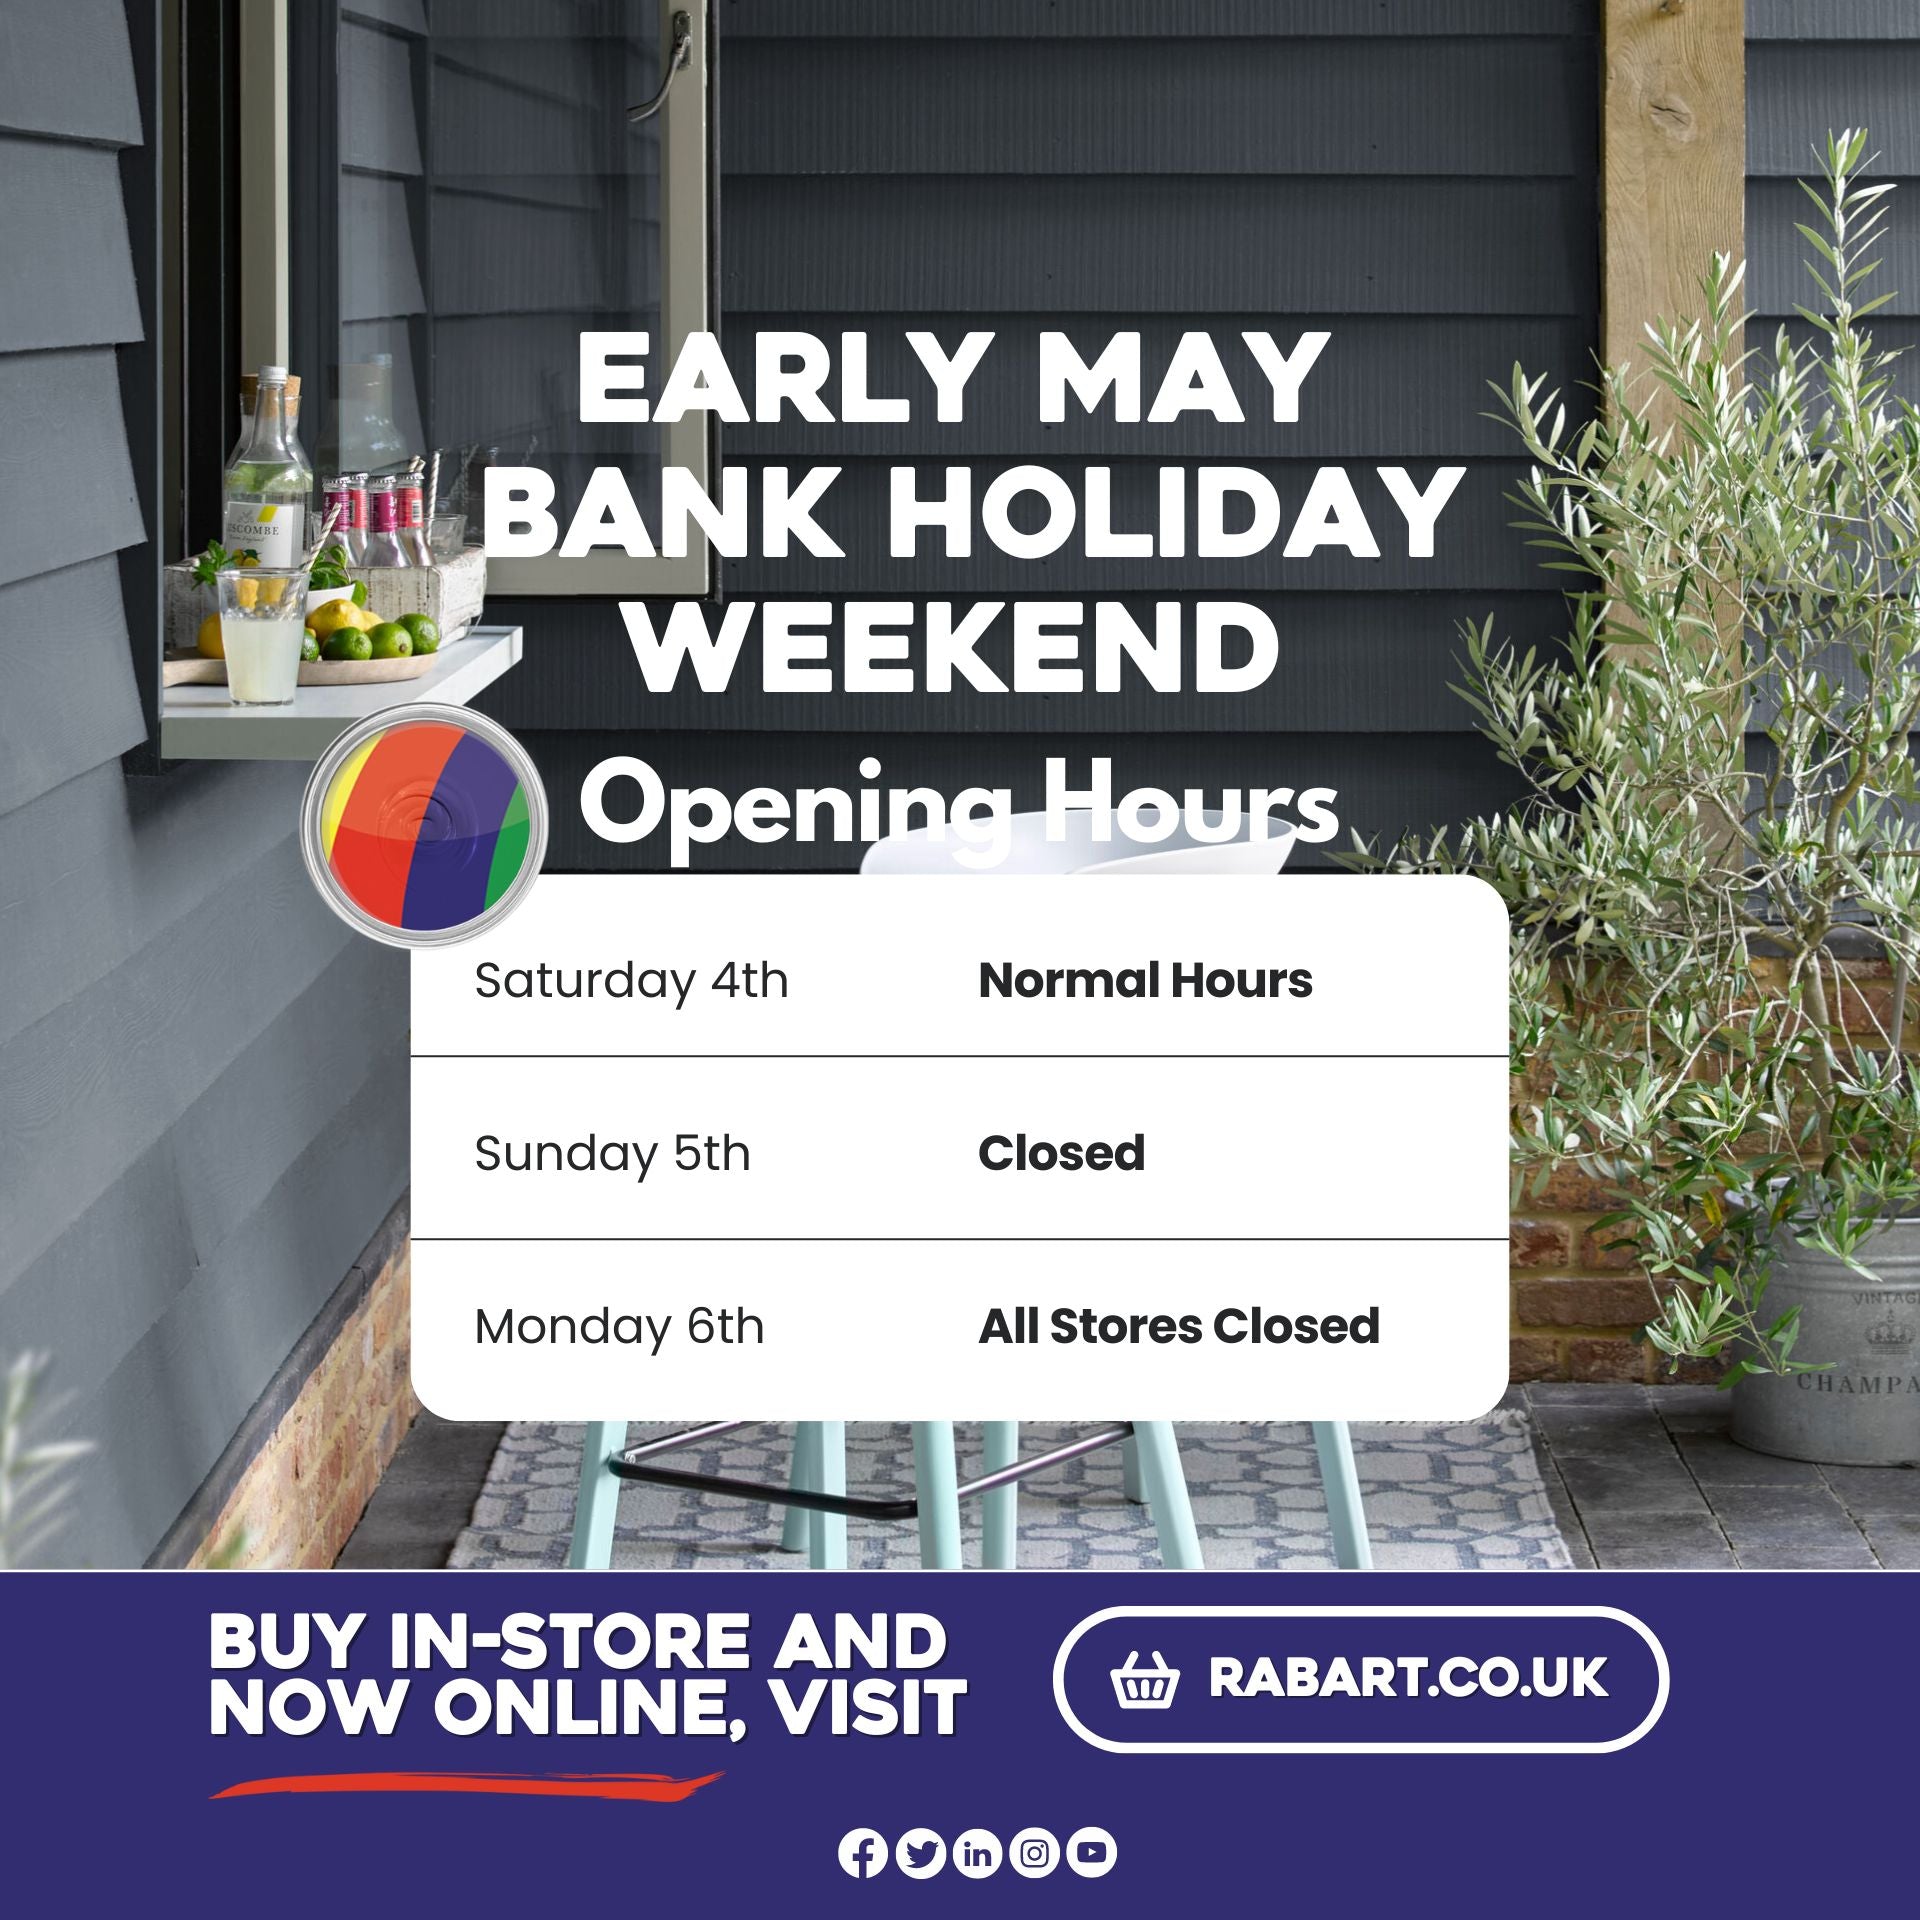 Early May Bank Holiday Weekend Opening Hours at Rabart